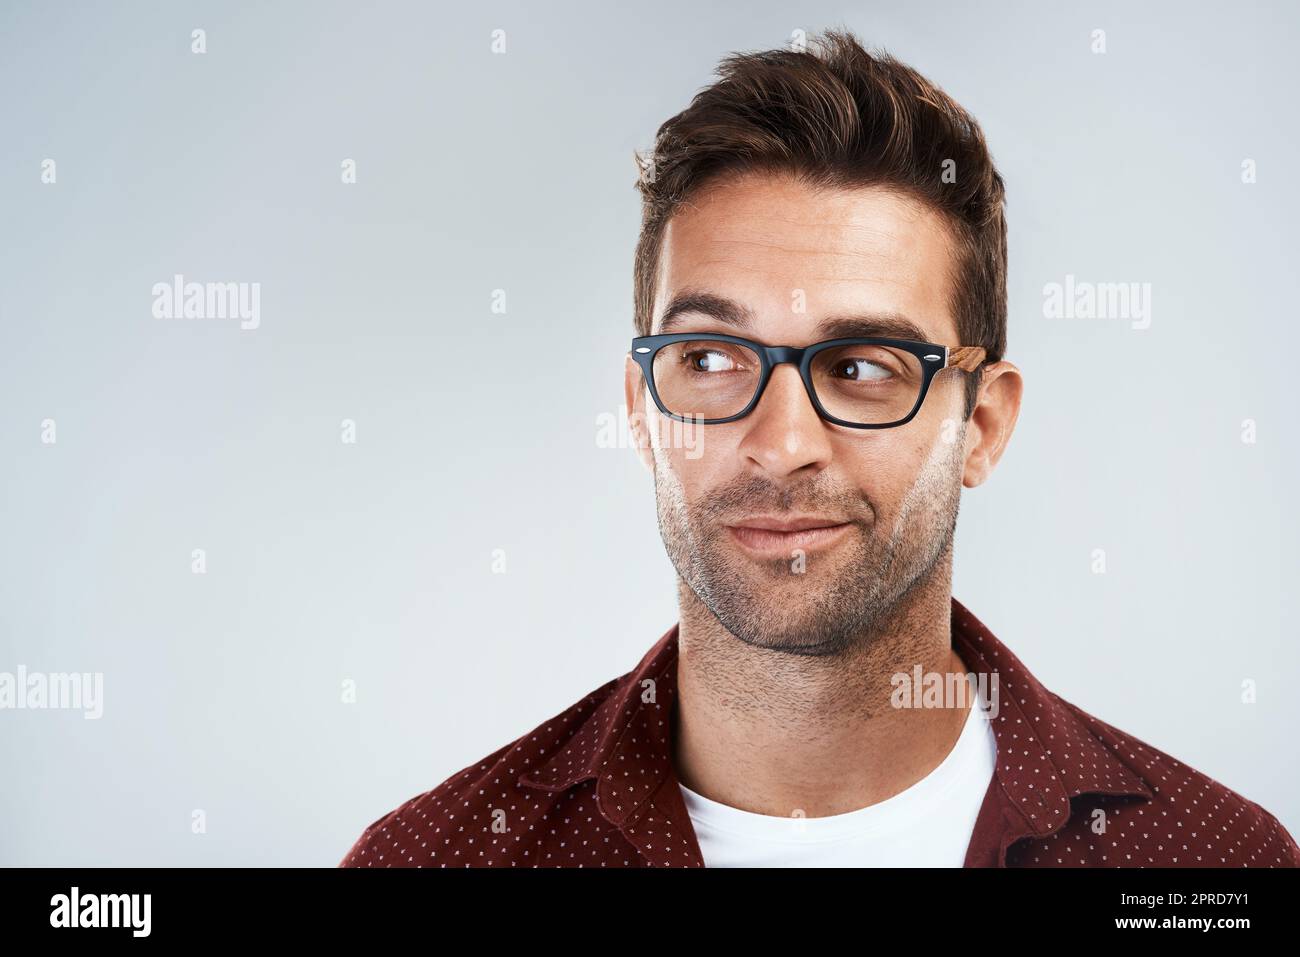 Dont be shy. Portrait of a cheerful young man wearing glasses and smiling brightly while standing against a grey background. Stock Photo